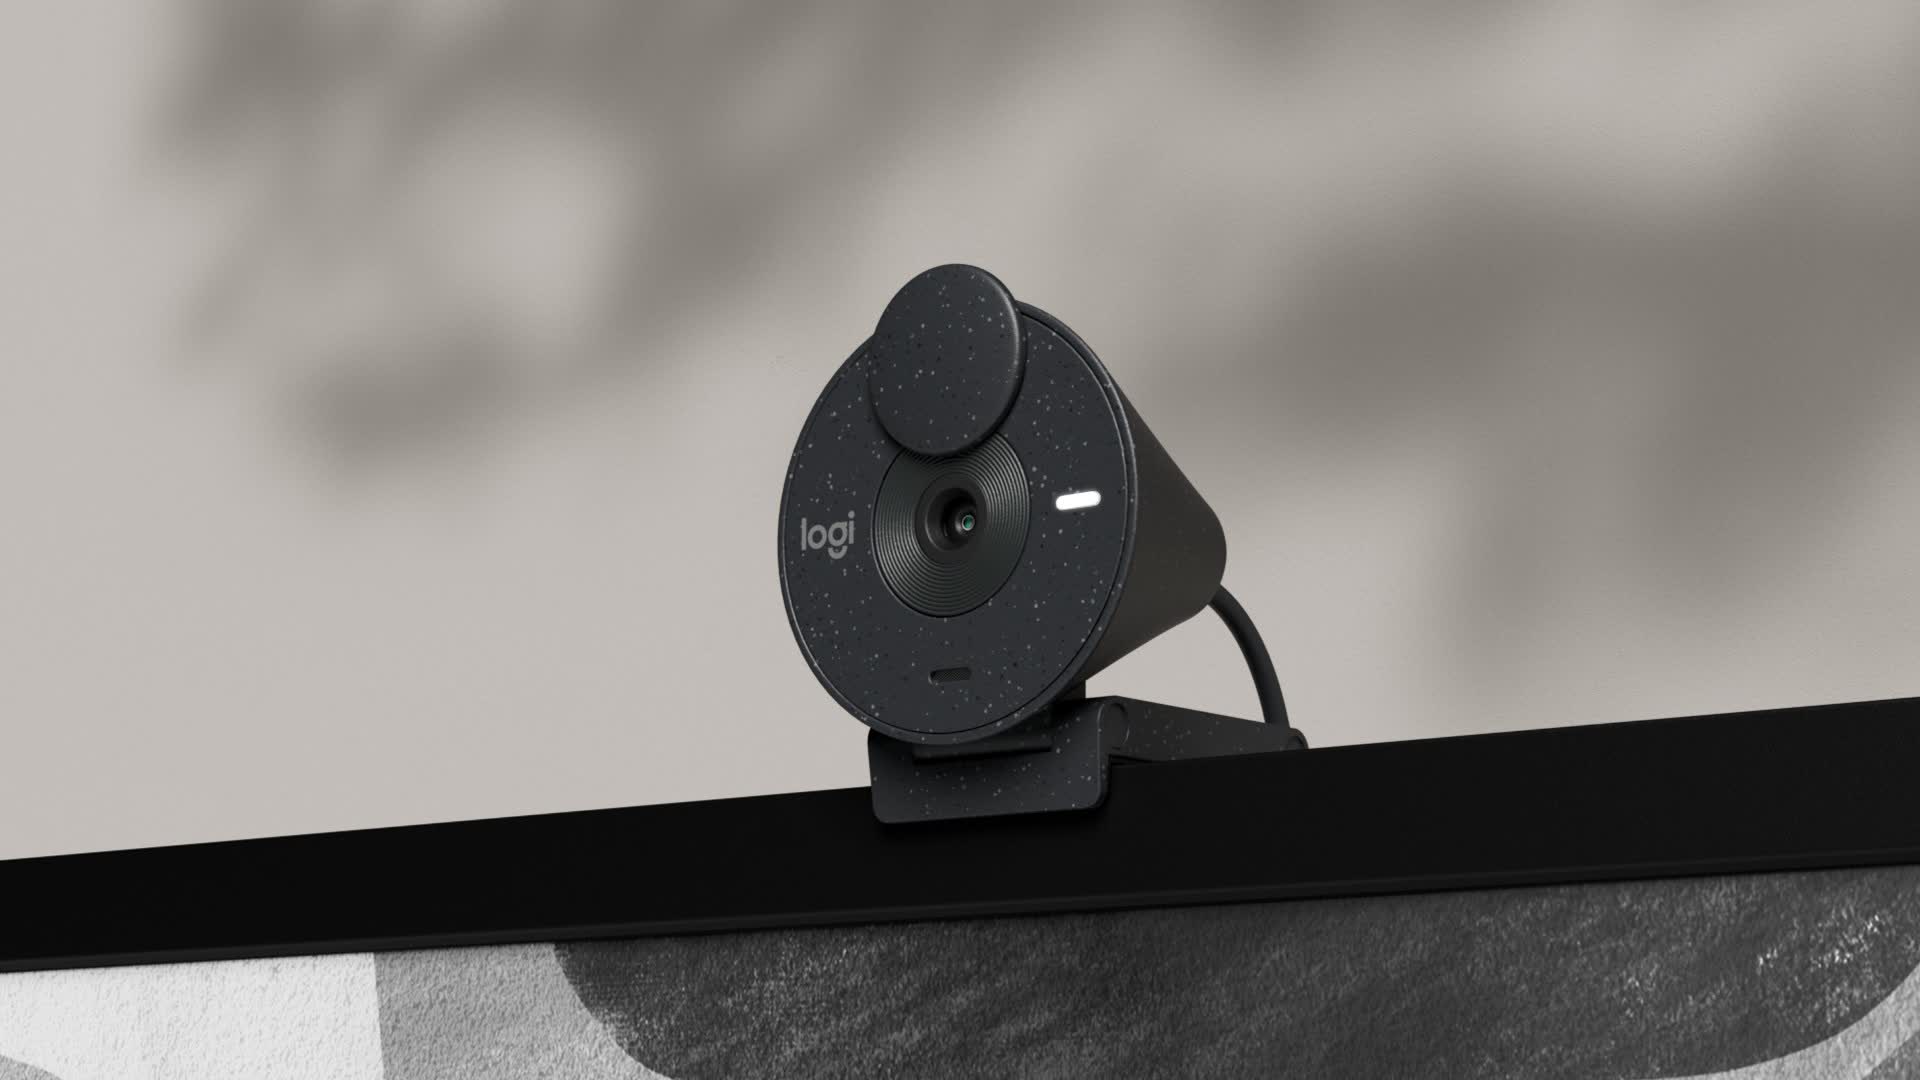 Logitech's latest webcam delivers 1080p HD and auto light correction on a budget | TechSpot